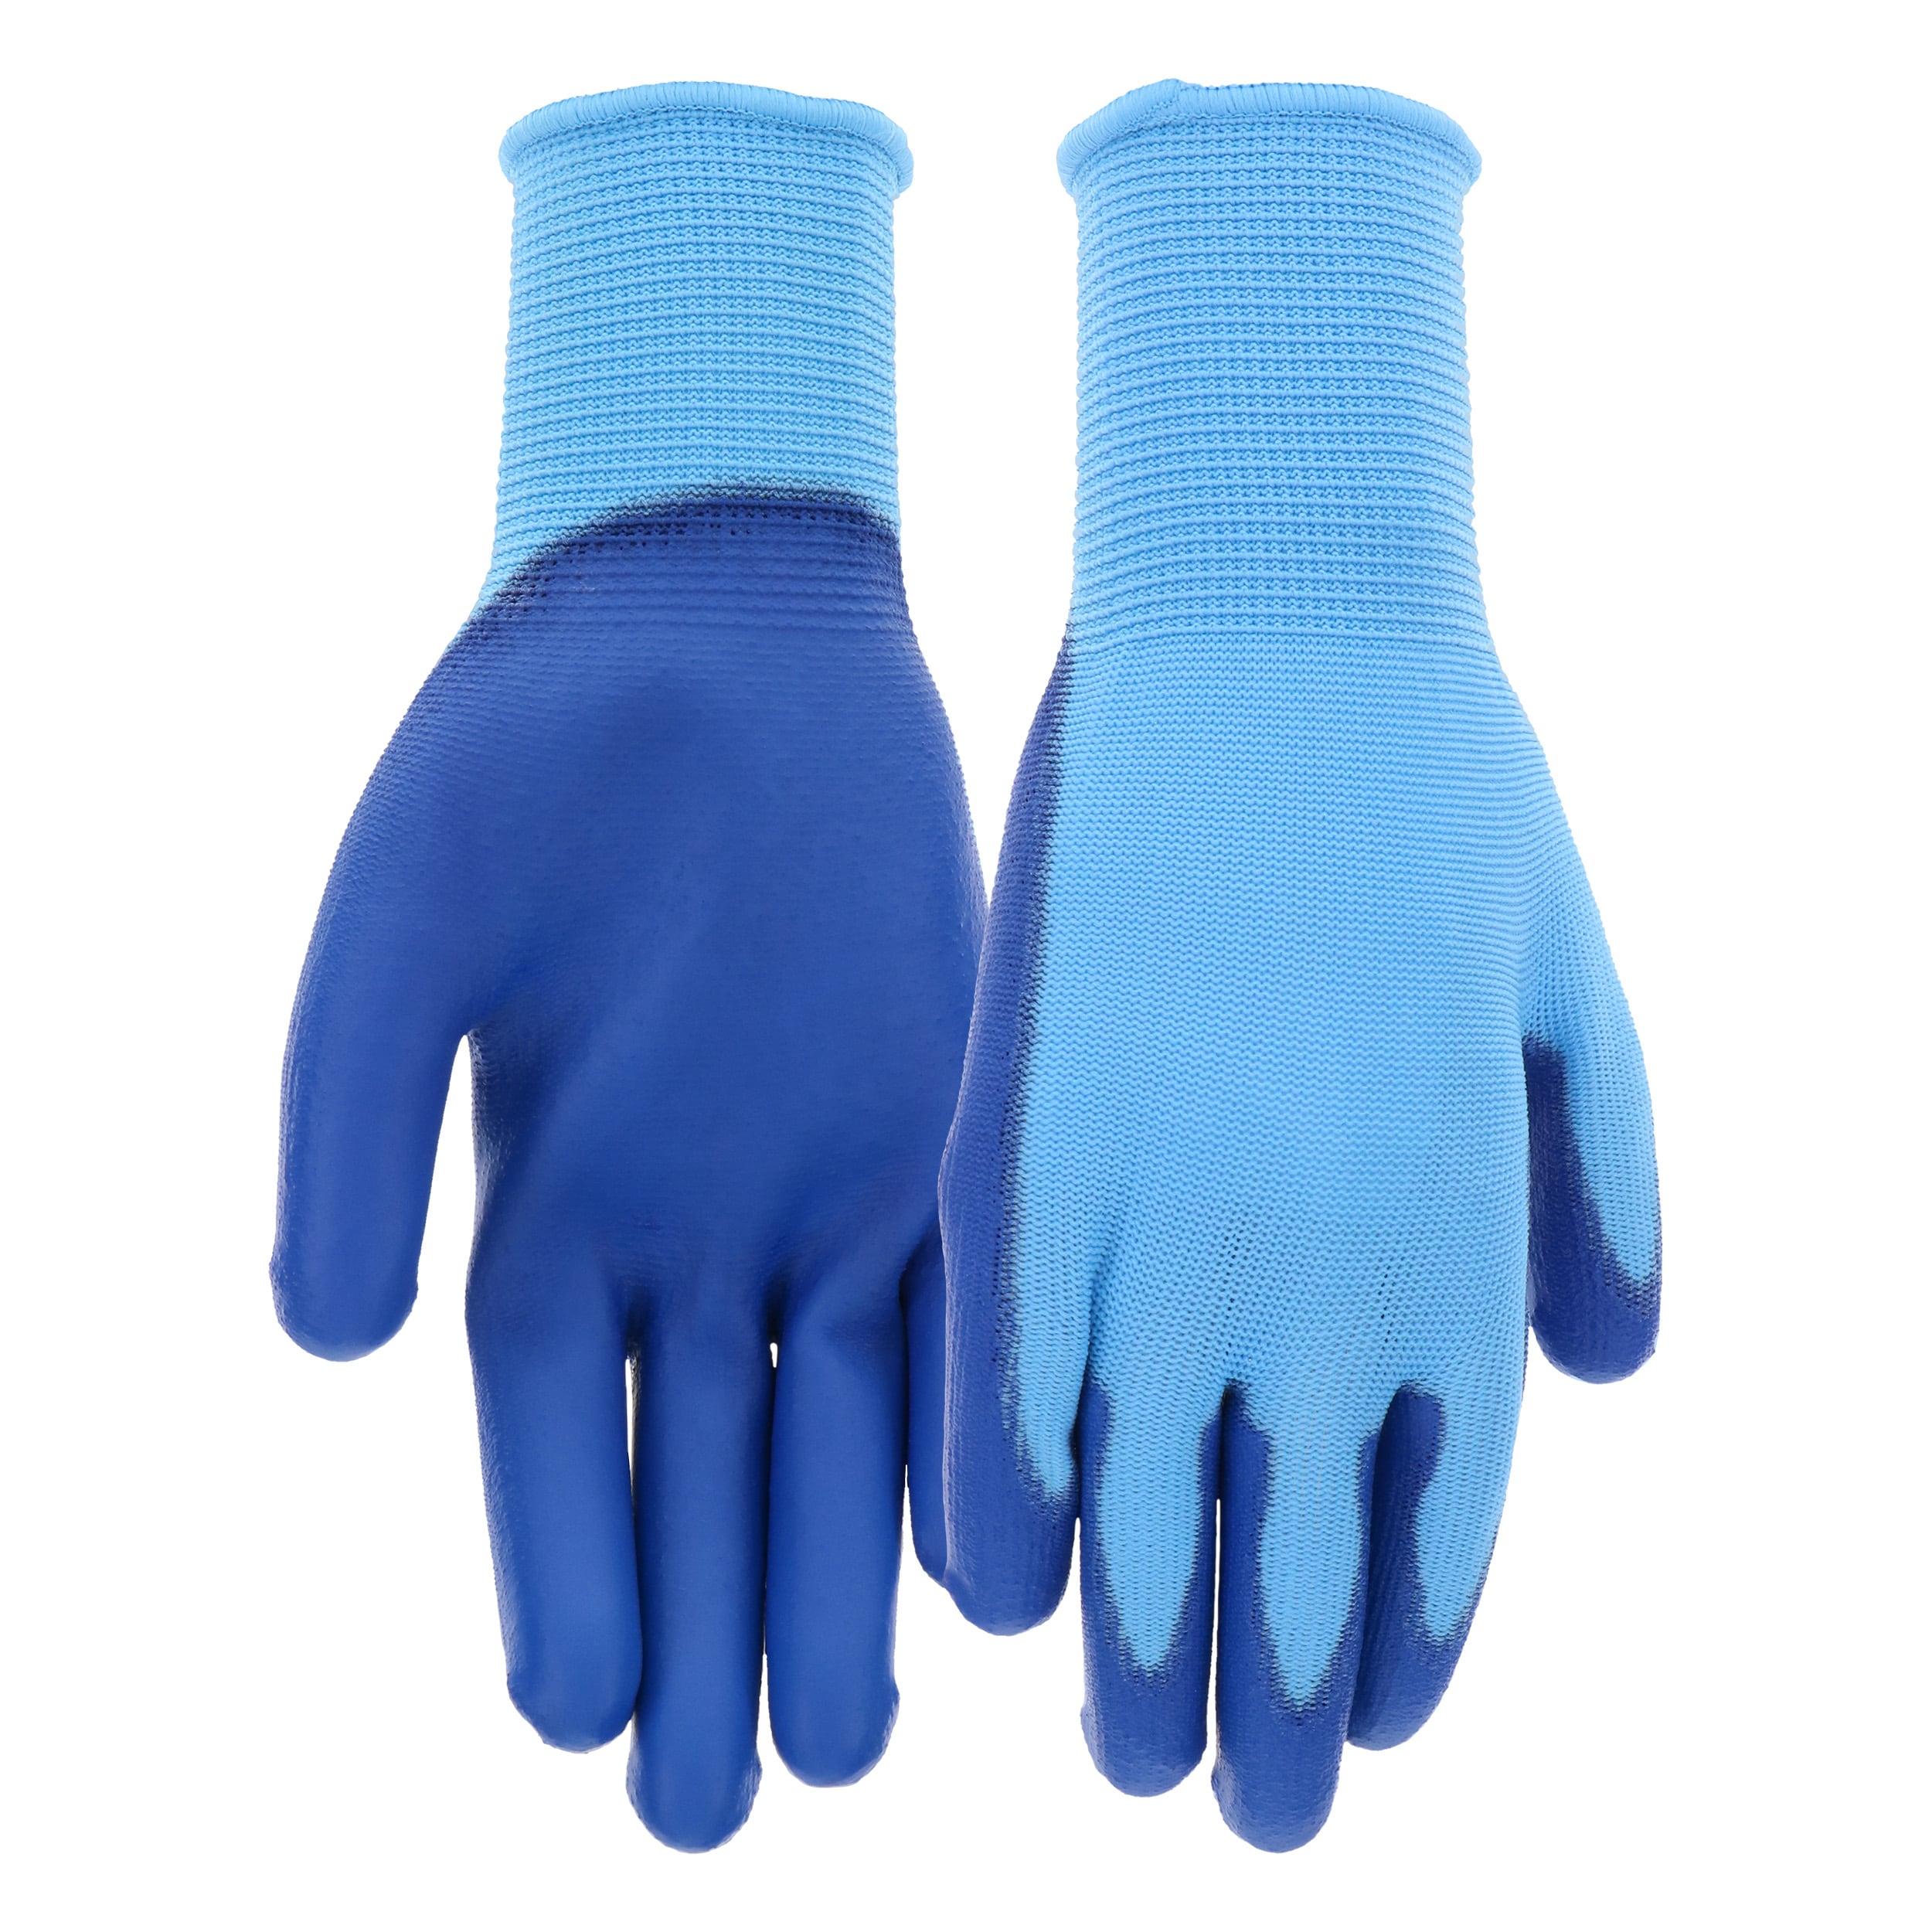 at Home Blue Silicone Scrubber Gloves - 2 ct